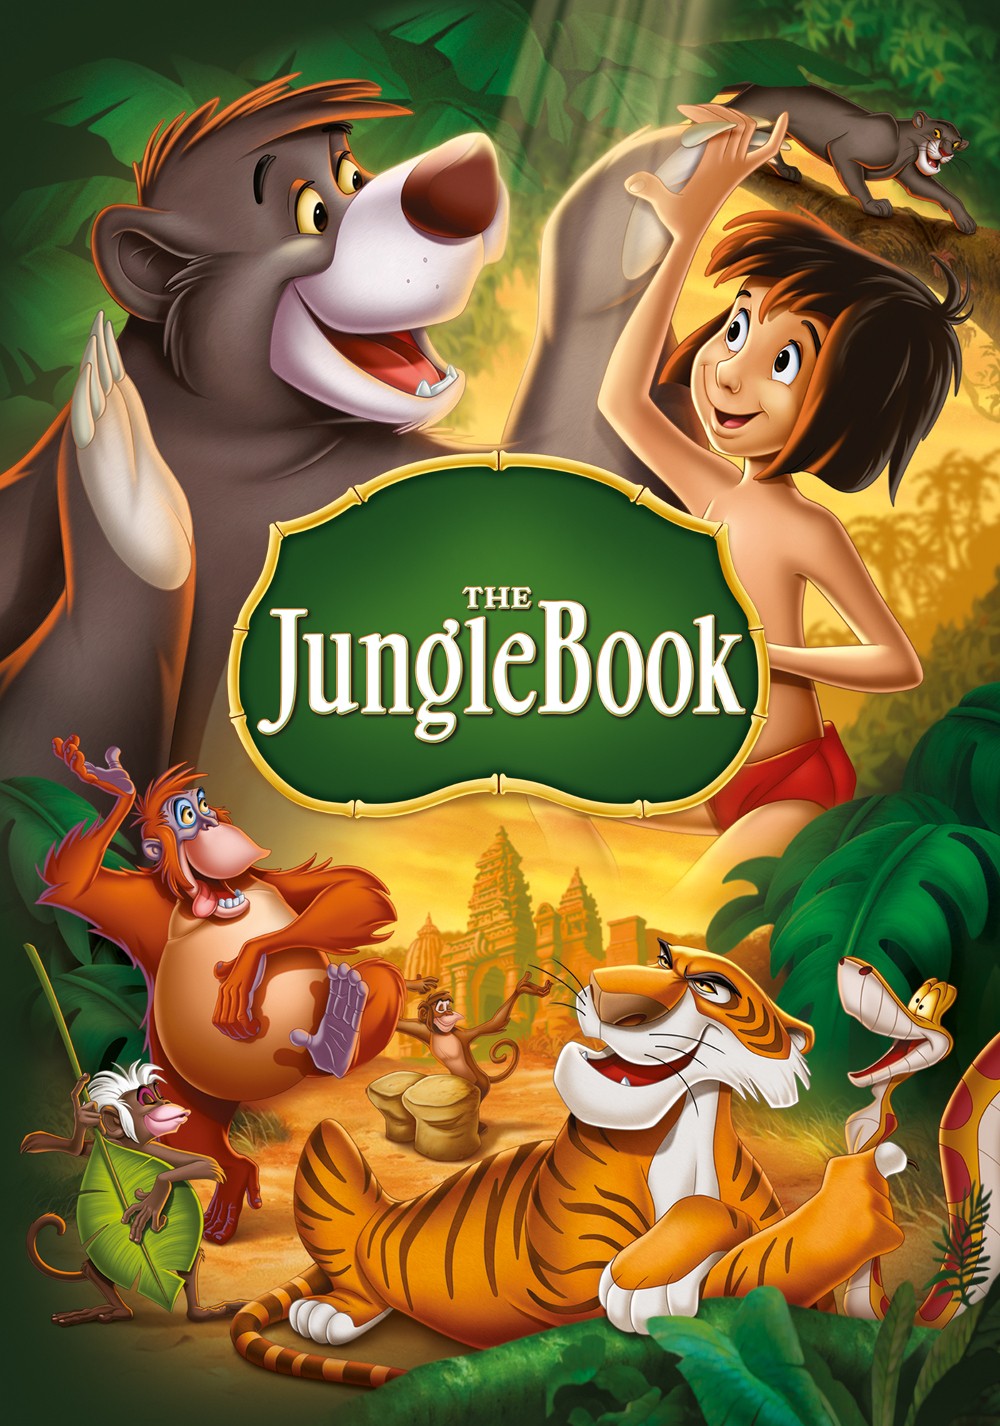 The Jungle Book and its main antagonist Shere Khan